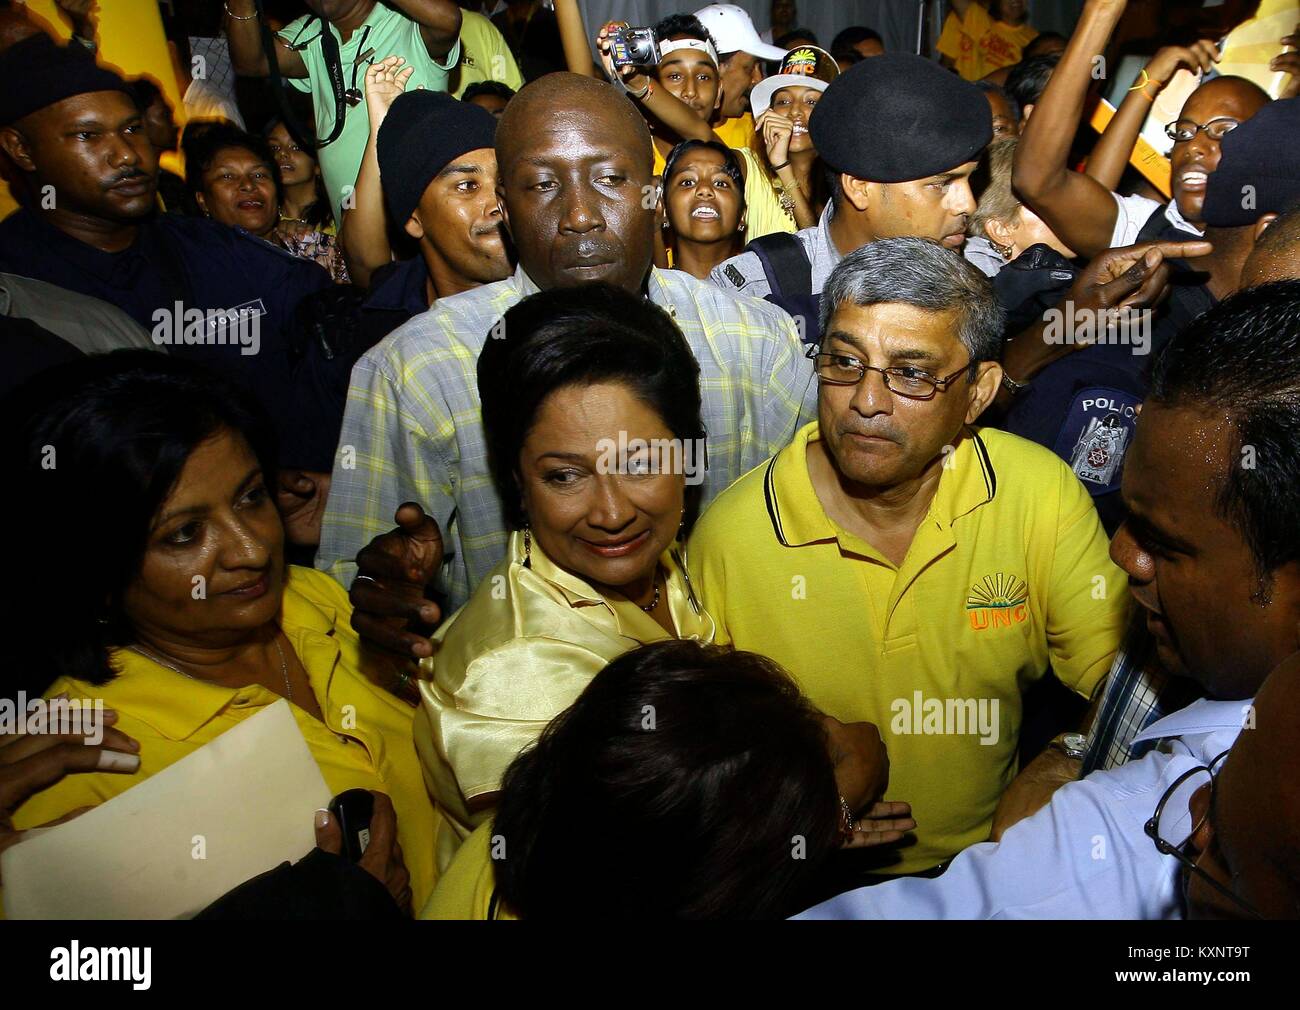 May 24, 2010 - Puerto Espa''“A, Trinidad & Tobago - May 24, 2010. Kamla Persad-Bissessar (c) is a politician and lawyer. She was elected Prime Minister of Trinidad and Tobago for the 2010 and 2015 period. Photo: Juan Carlos Hernandez Credit: Juan Carlos Hernandez/ZUMA Wire/Alamy Live News Stock Photo